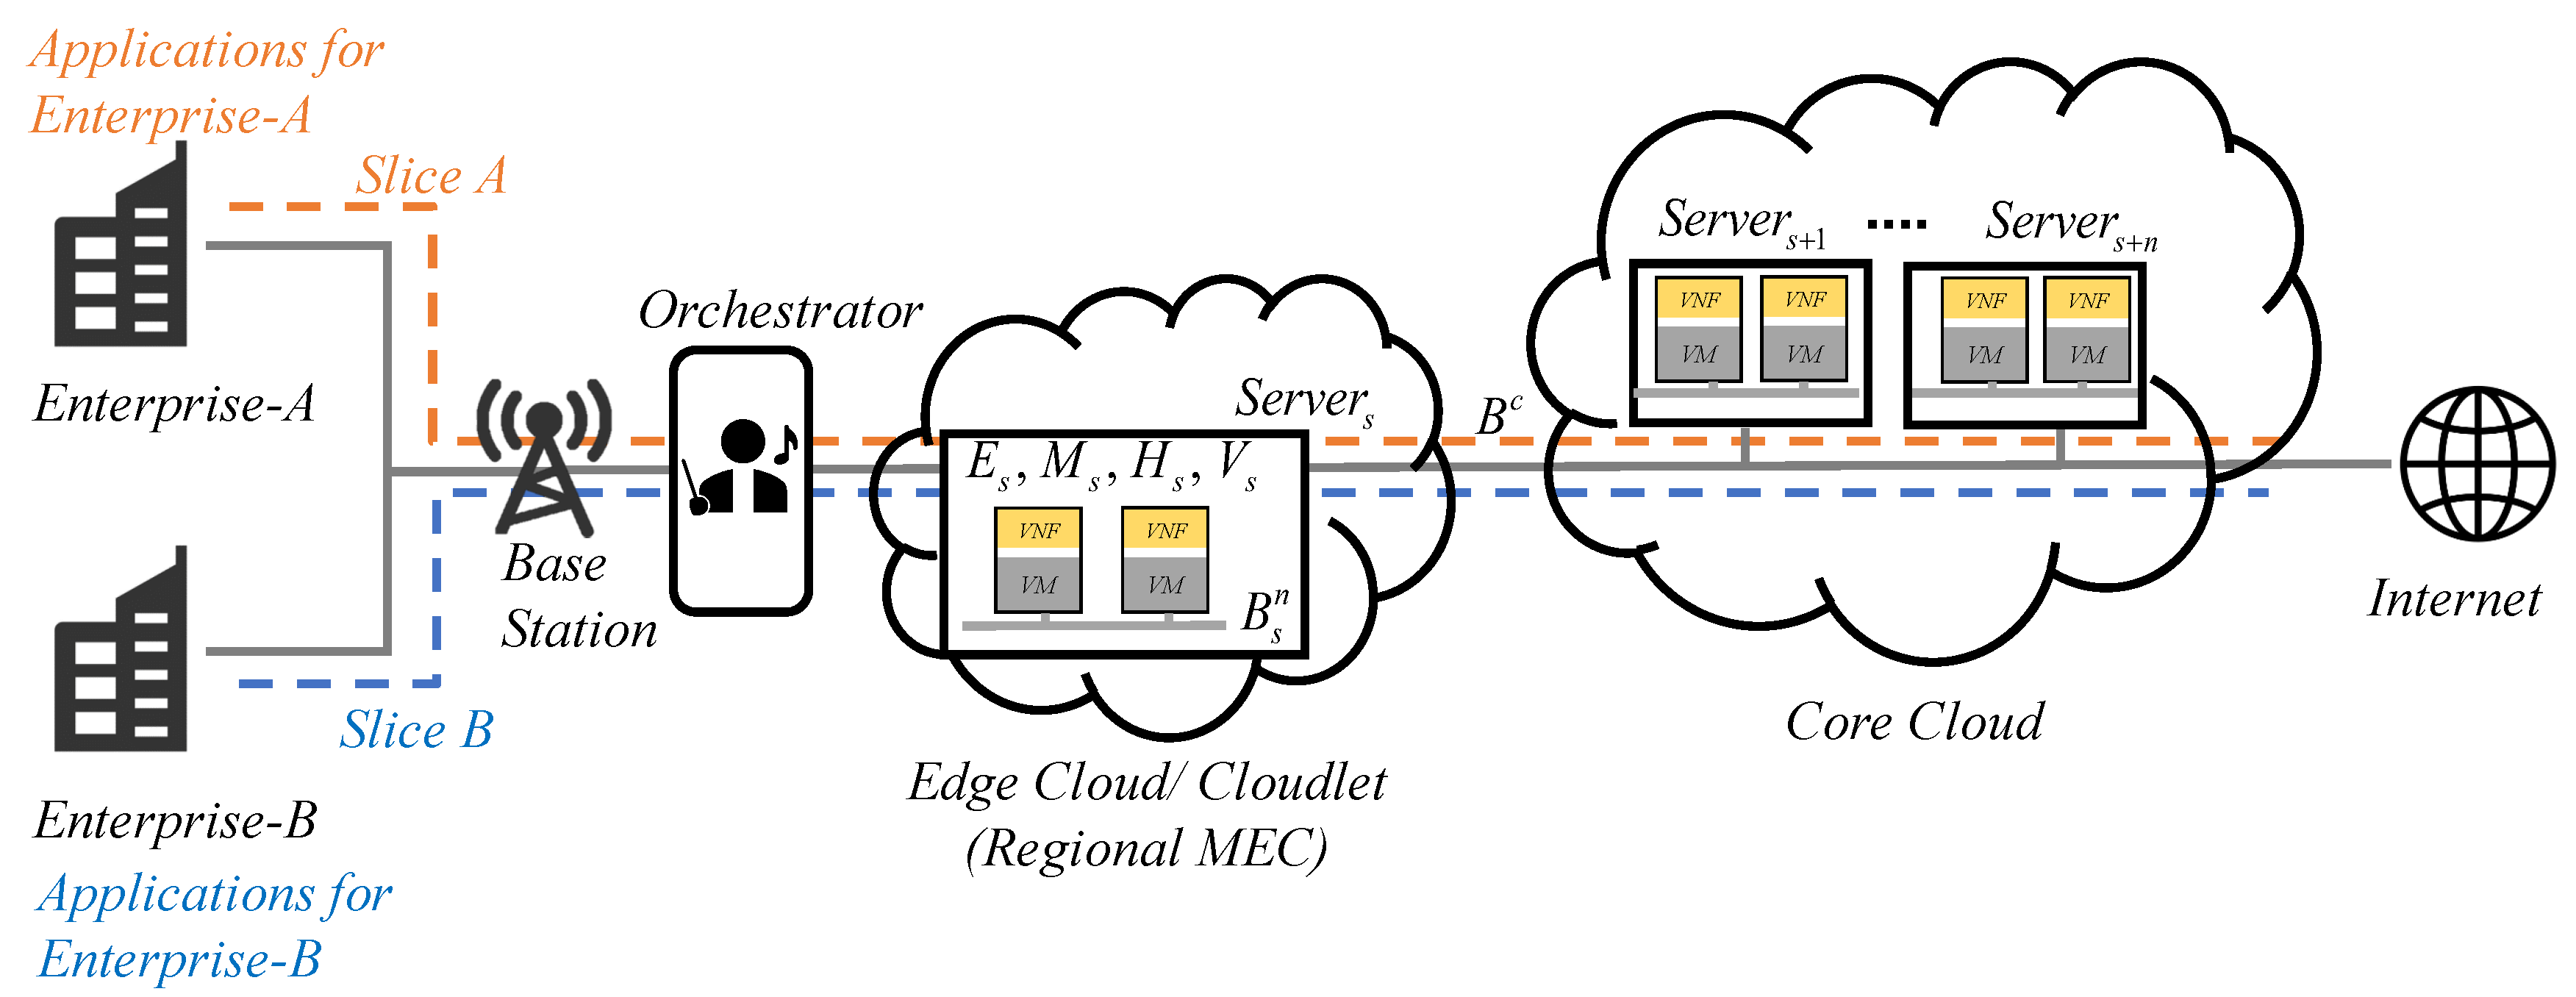 Sensors Free Full Text Optimization Based Resource Management Algorithms With Considerations Of Client Satisfaction And High Availability In Elastic 5g Network Slices Html